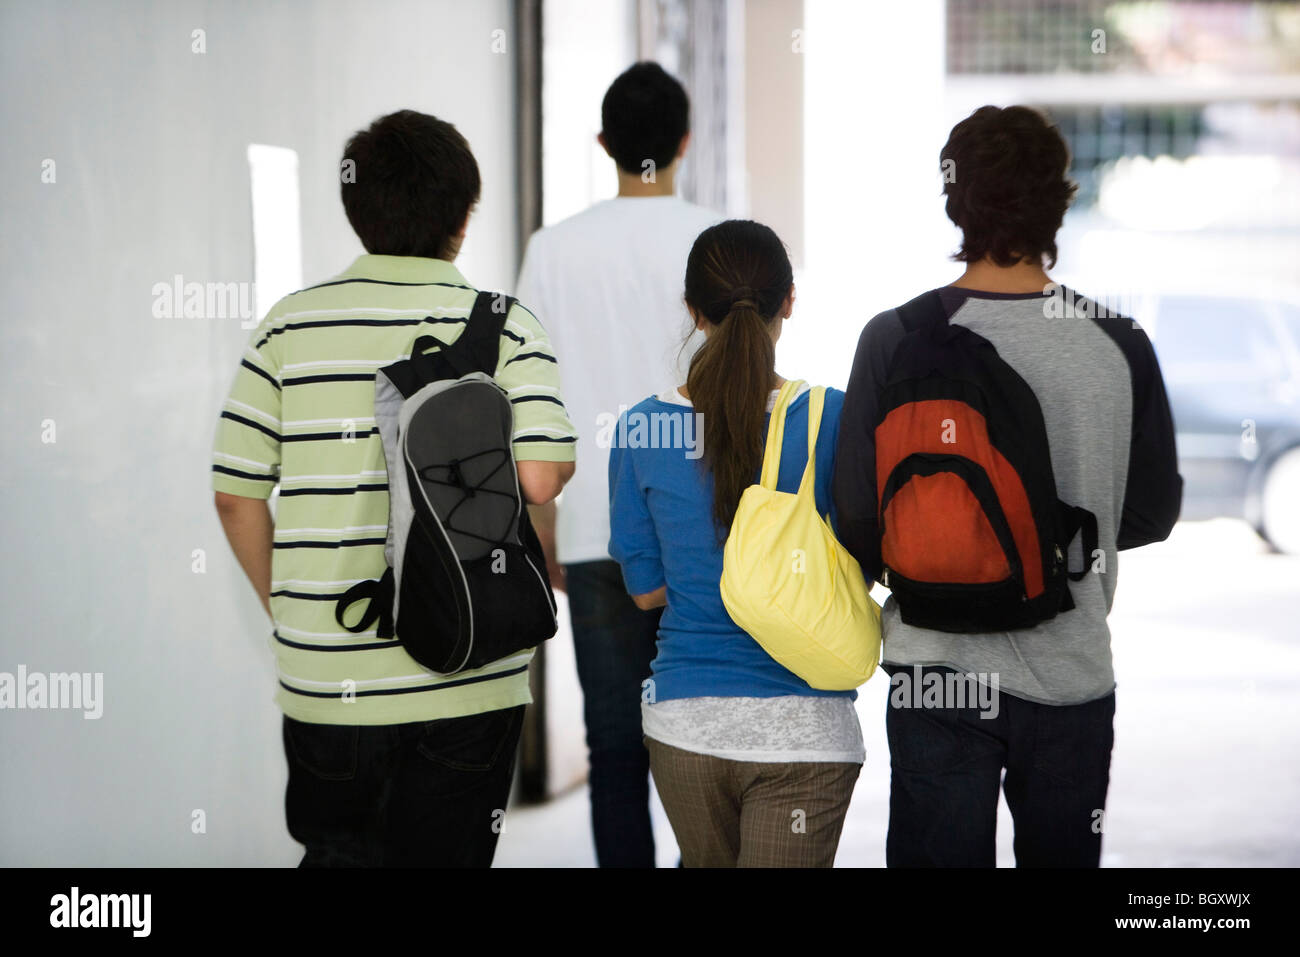 Students walking together in corridor, rear view Stock Photo